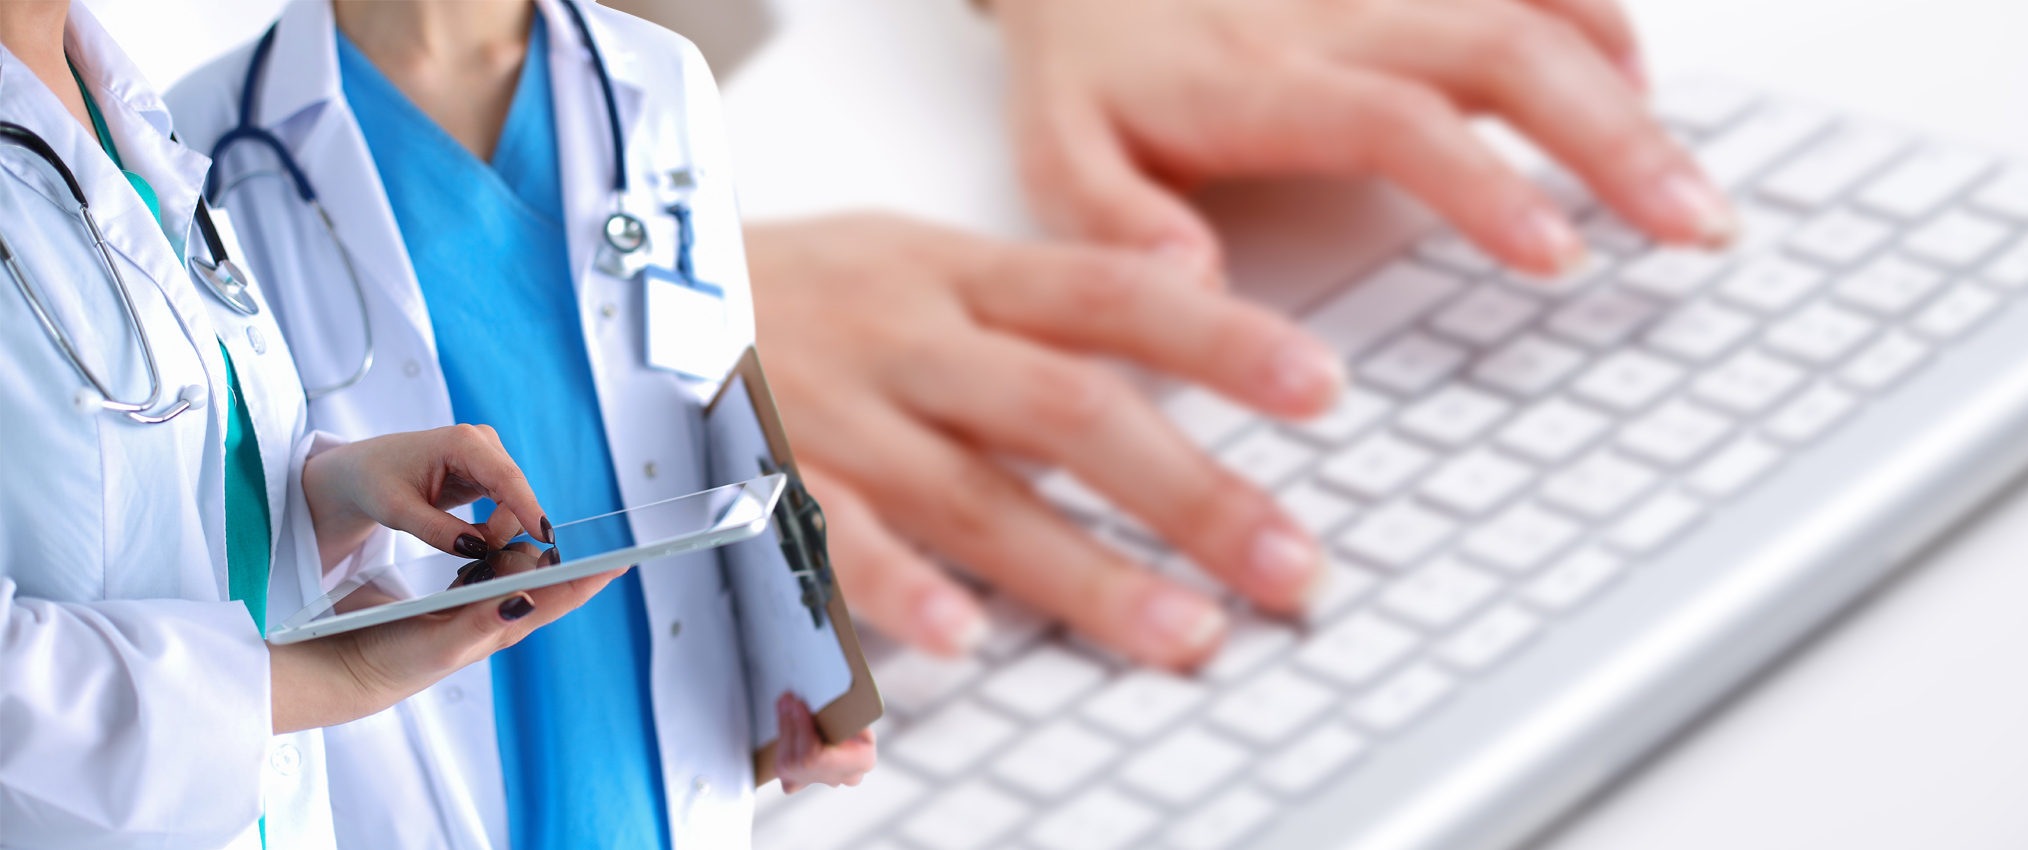 Significance of Data Entry in the Healthcare Industry